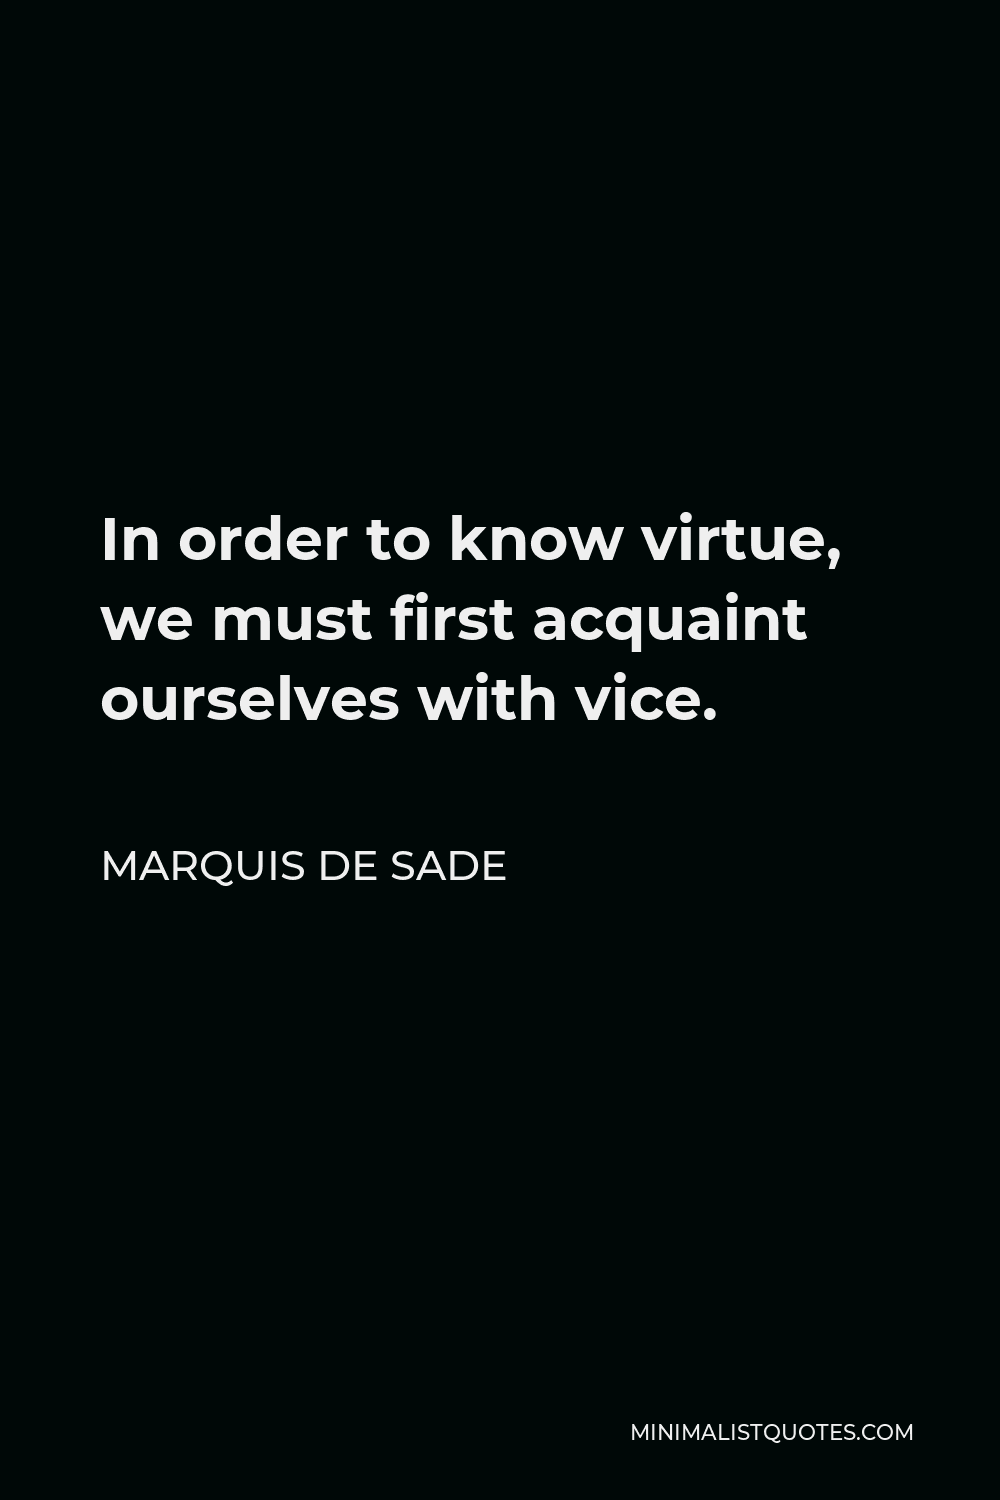 Marquis de Sade Quote - In order to know virtue, we must first acquaint ourselves with vice.